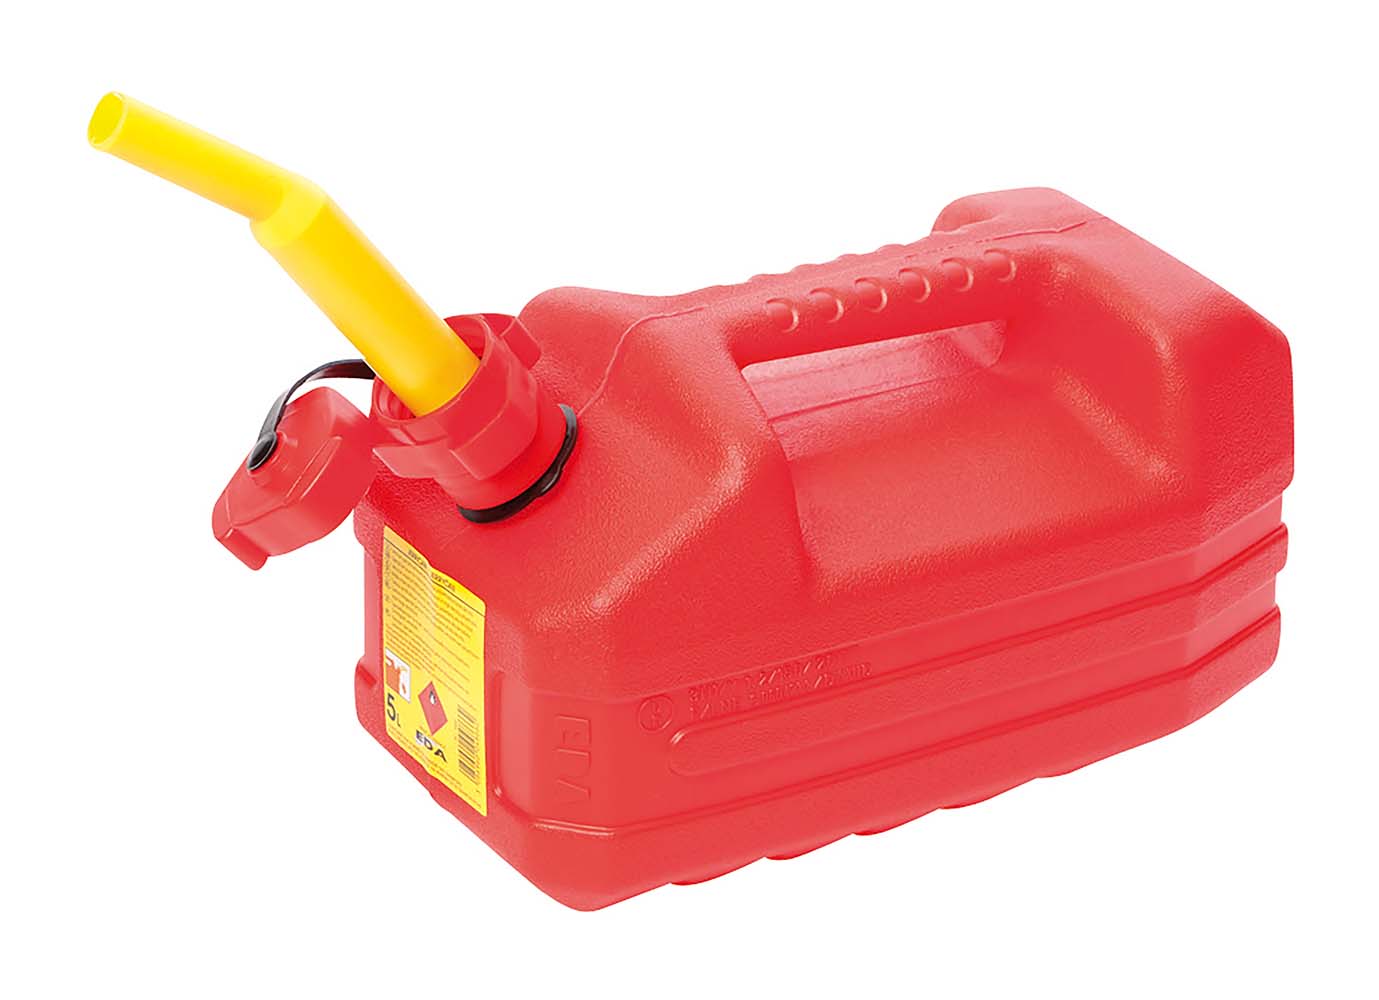 6603760 Solid jerry can with spout. This jerrycan is suitable for petrol or other liquids. Easy to use due to the sturdy handle and flexible spout. Closable by means of a screw cap.